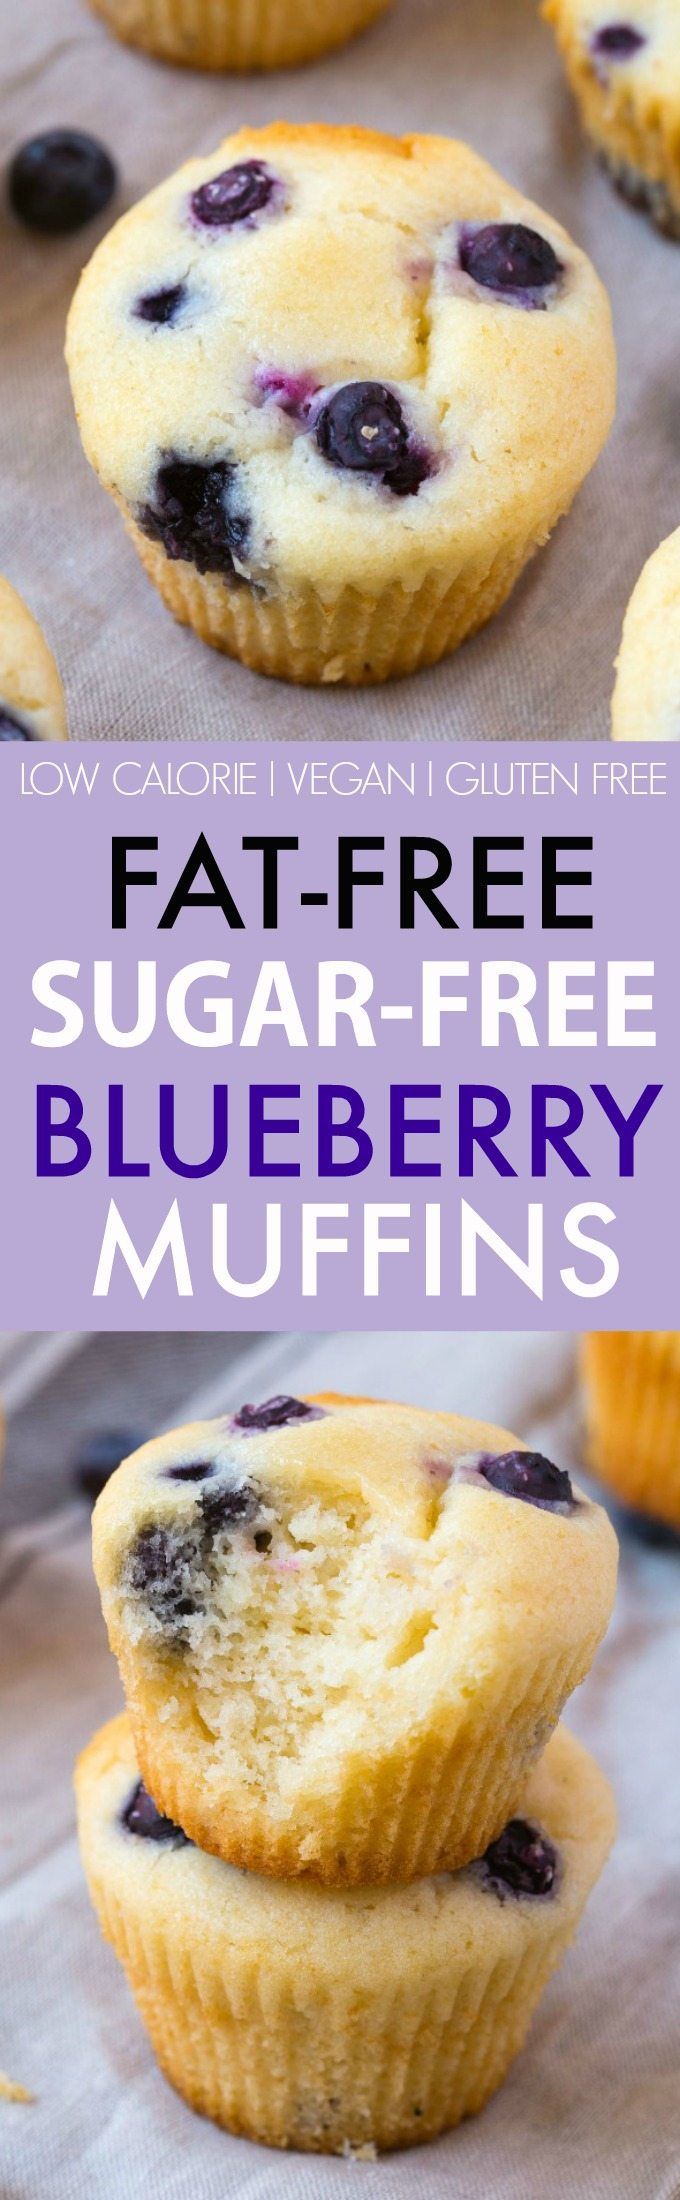 Fat Free Sugar Free Blueberry Muffins (V, GF, DF)- Moist and fluffy muffins which are tender on the outside- Made with ZERO fat